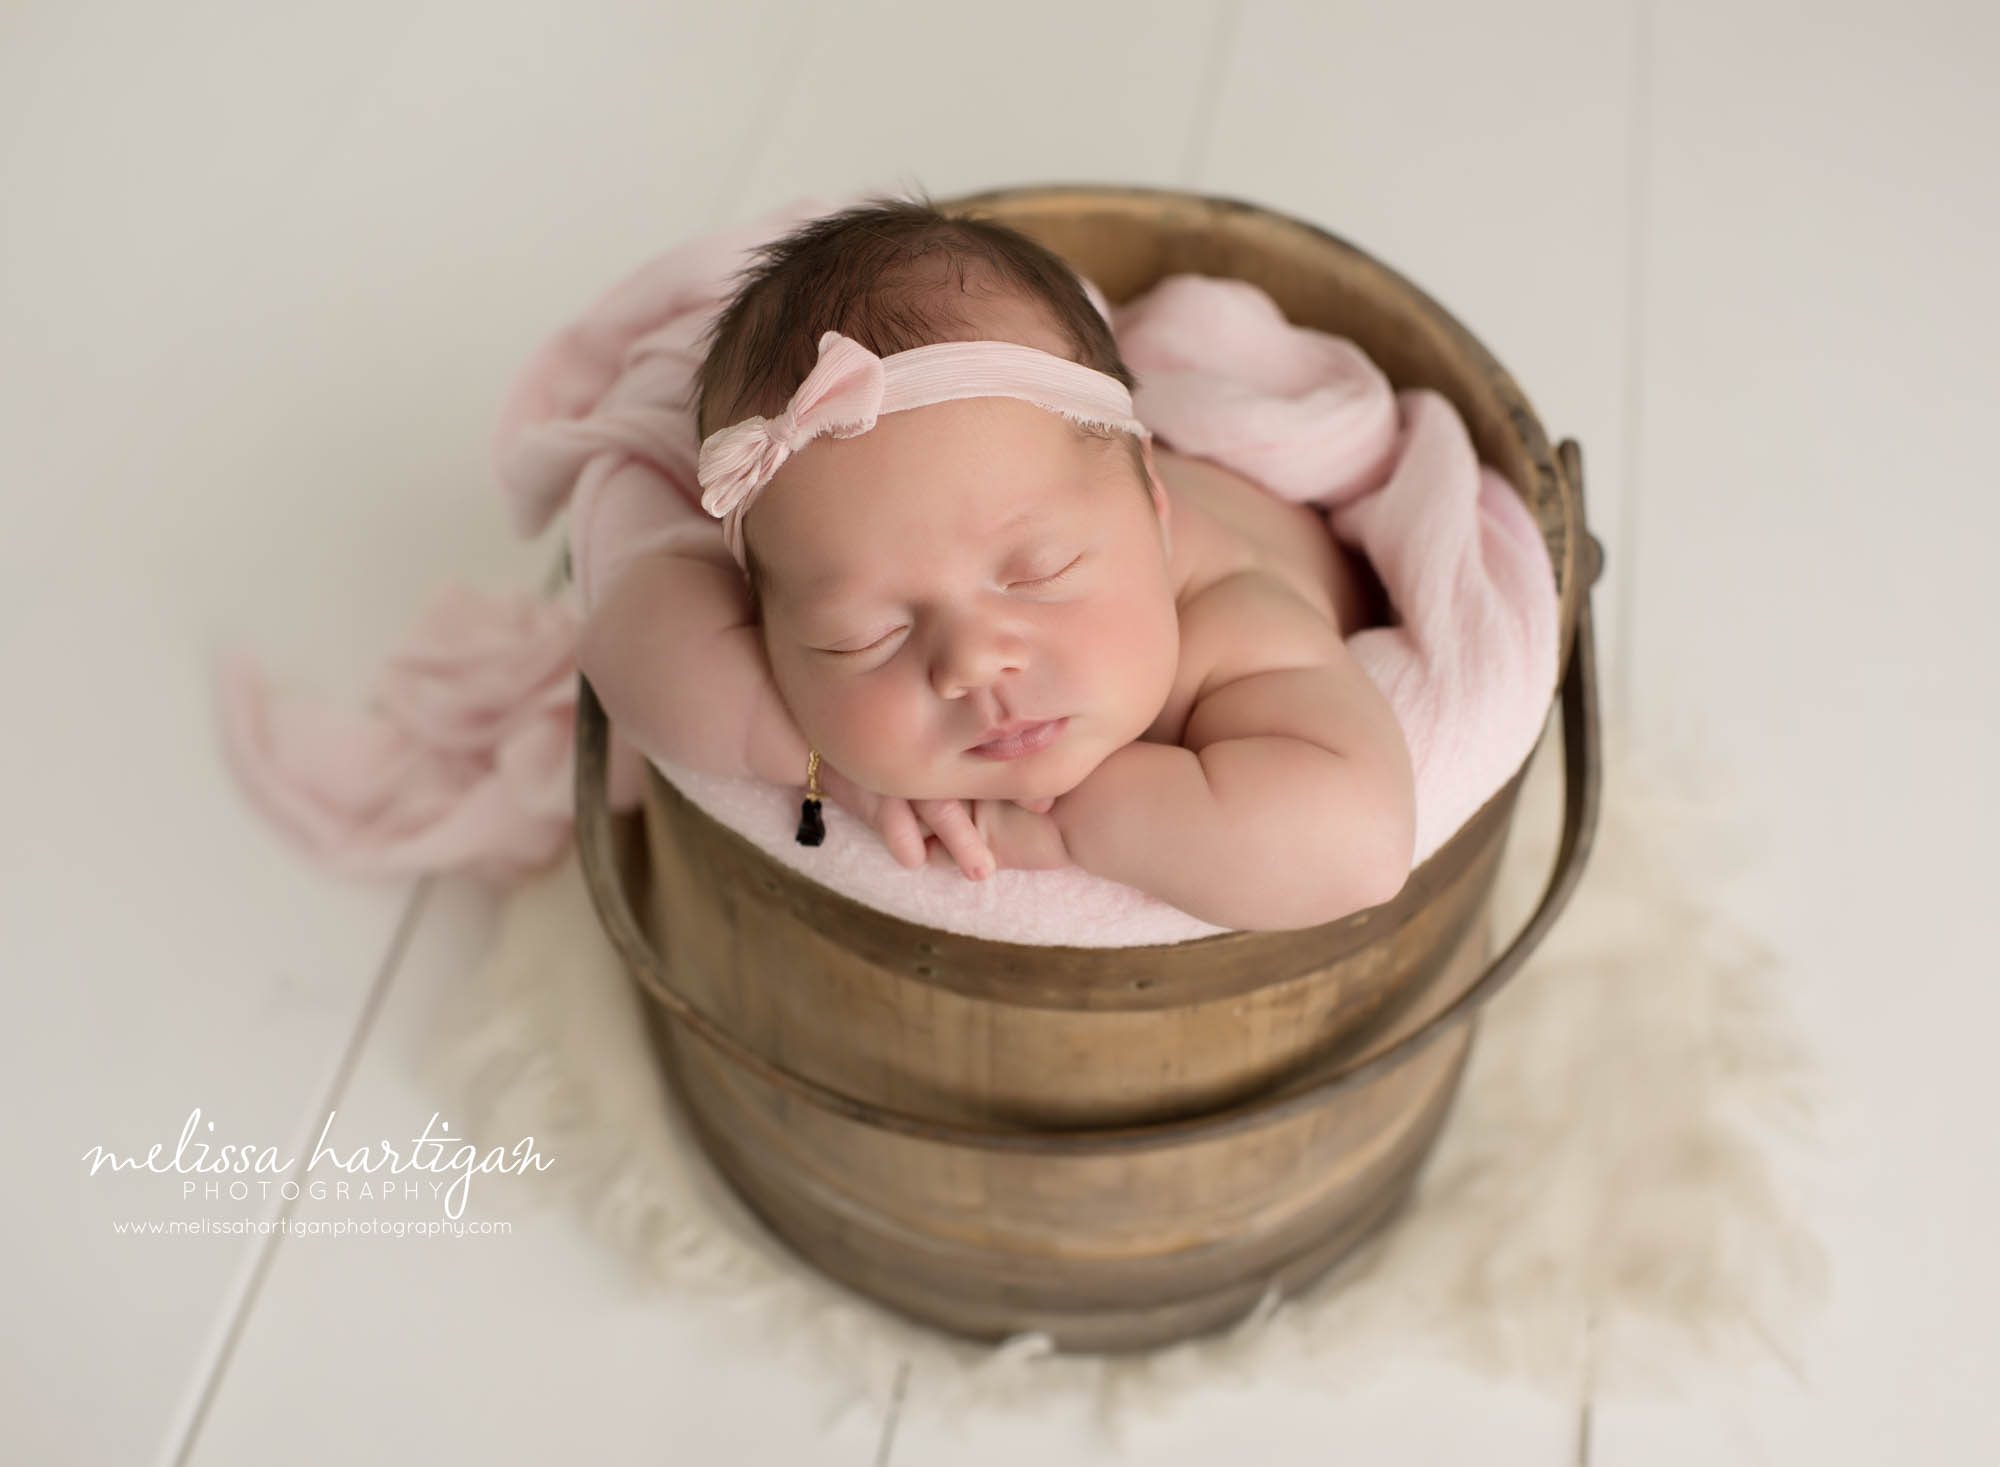 newborn baby girl posed in wooden bucket wearing pink bow headband and pink layer wrap